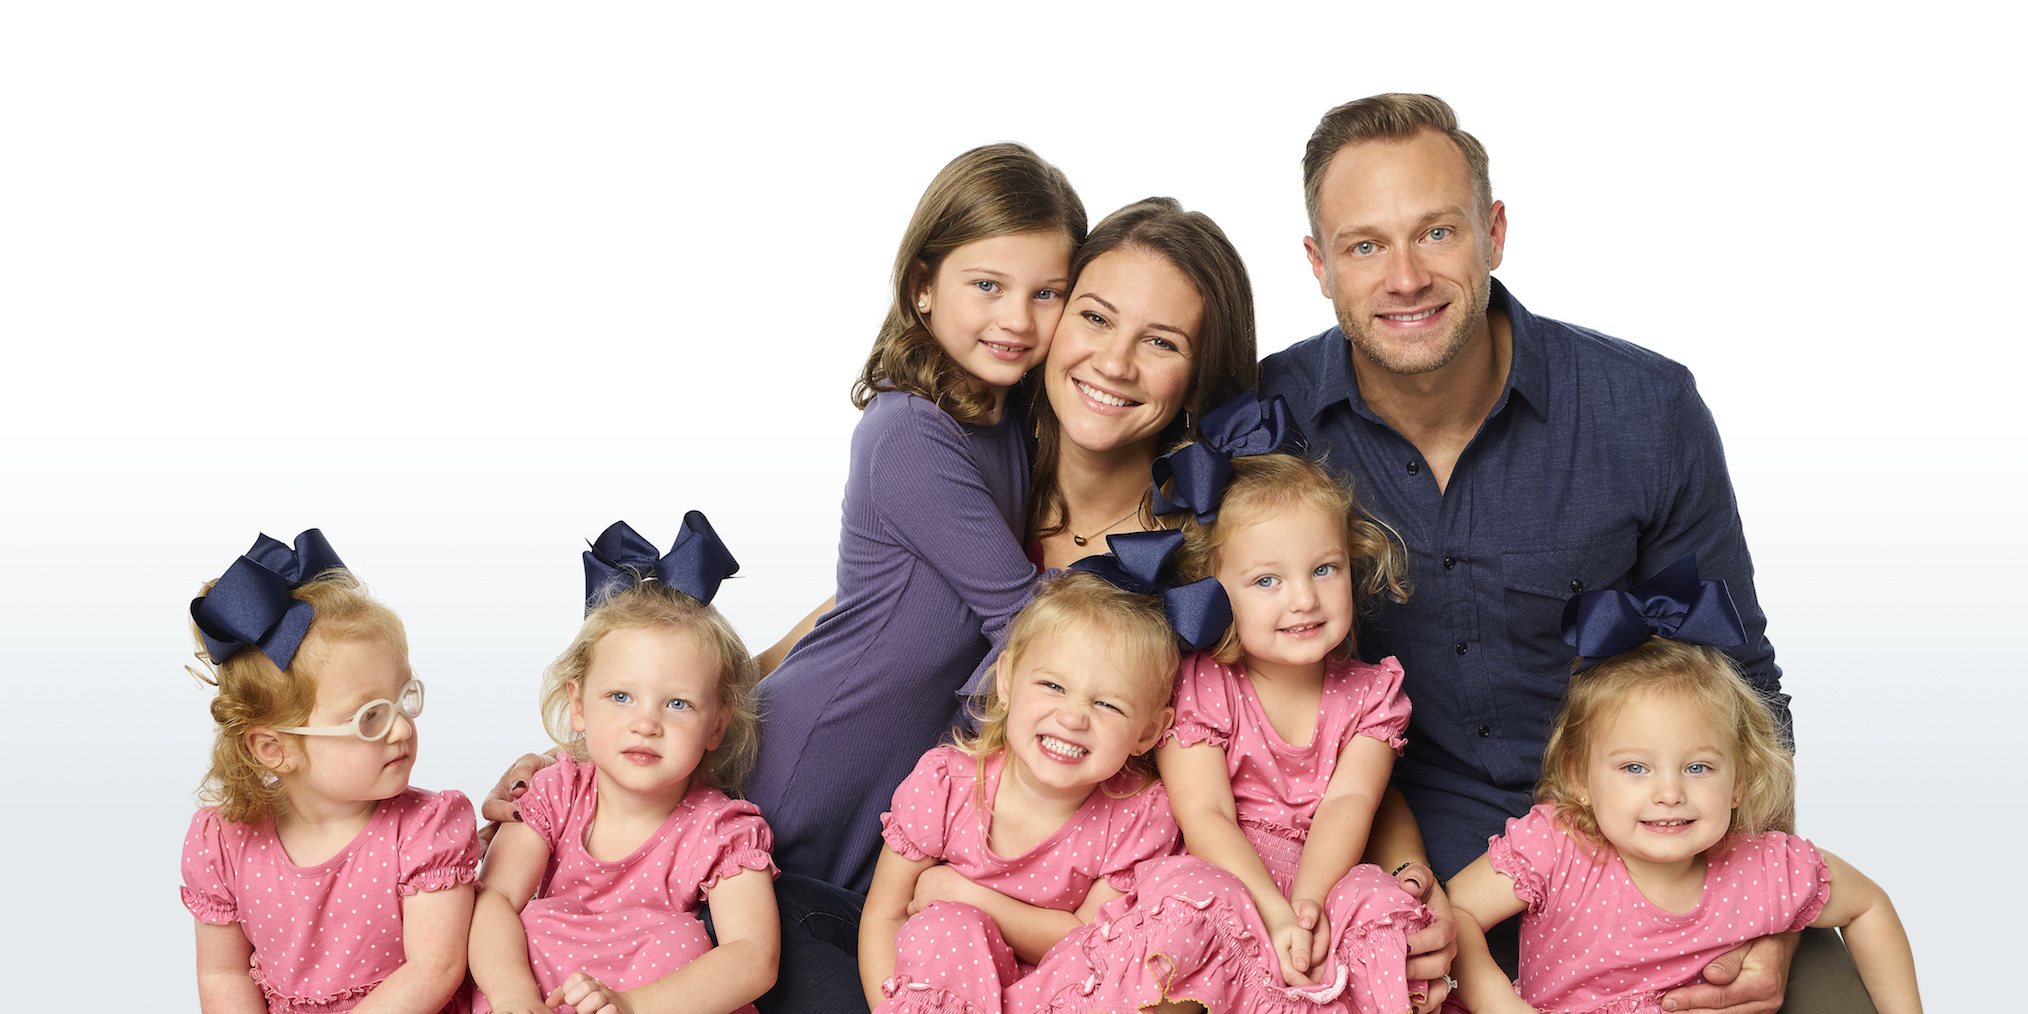 Outdaughtered Season 7 Episode 1